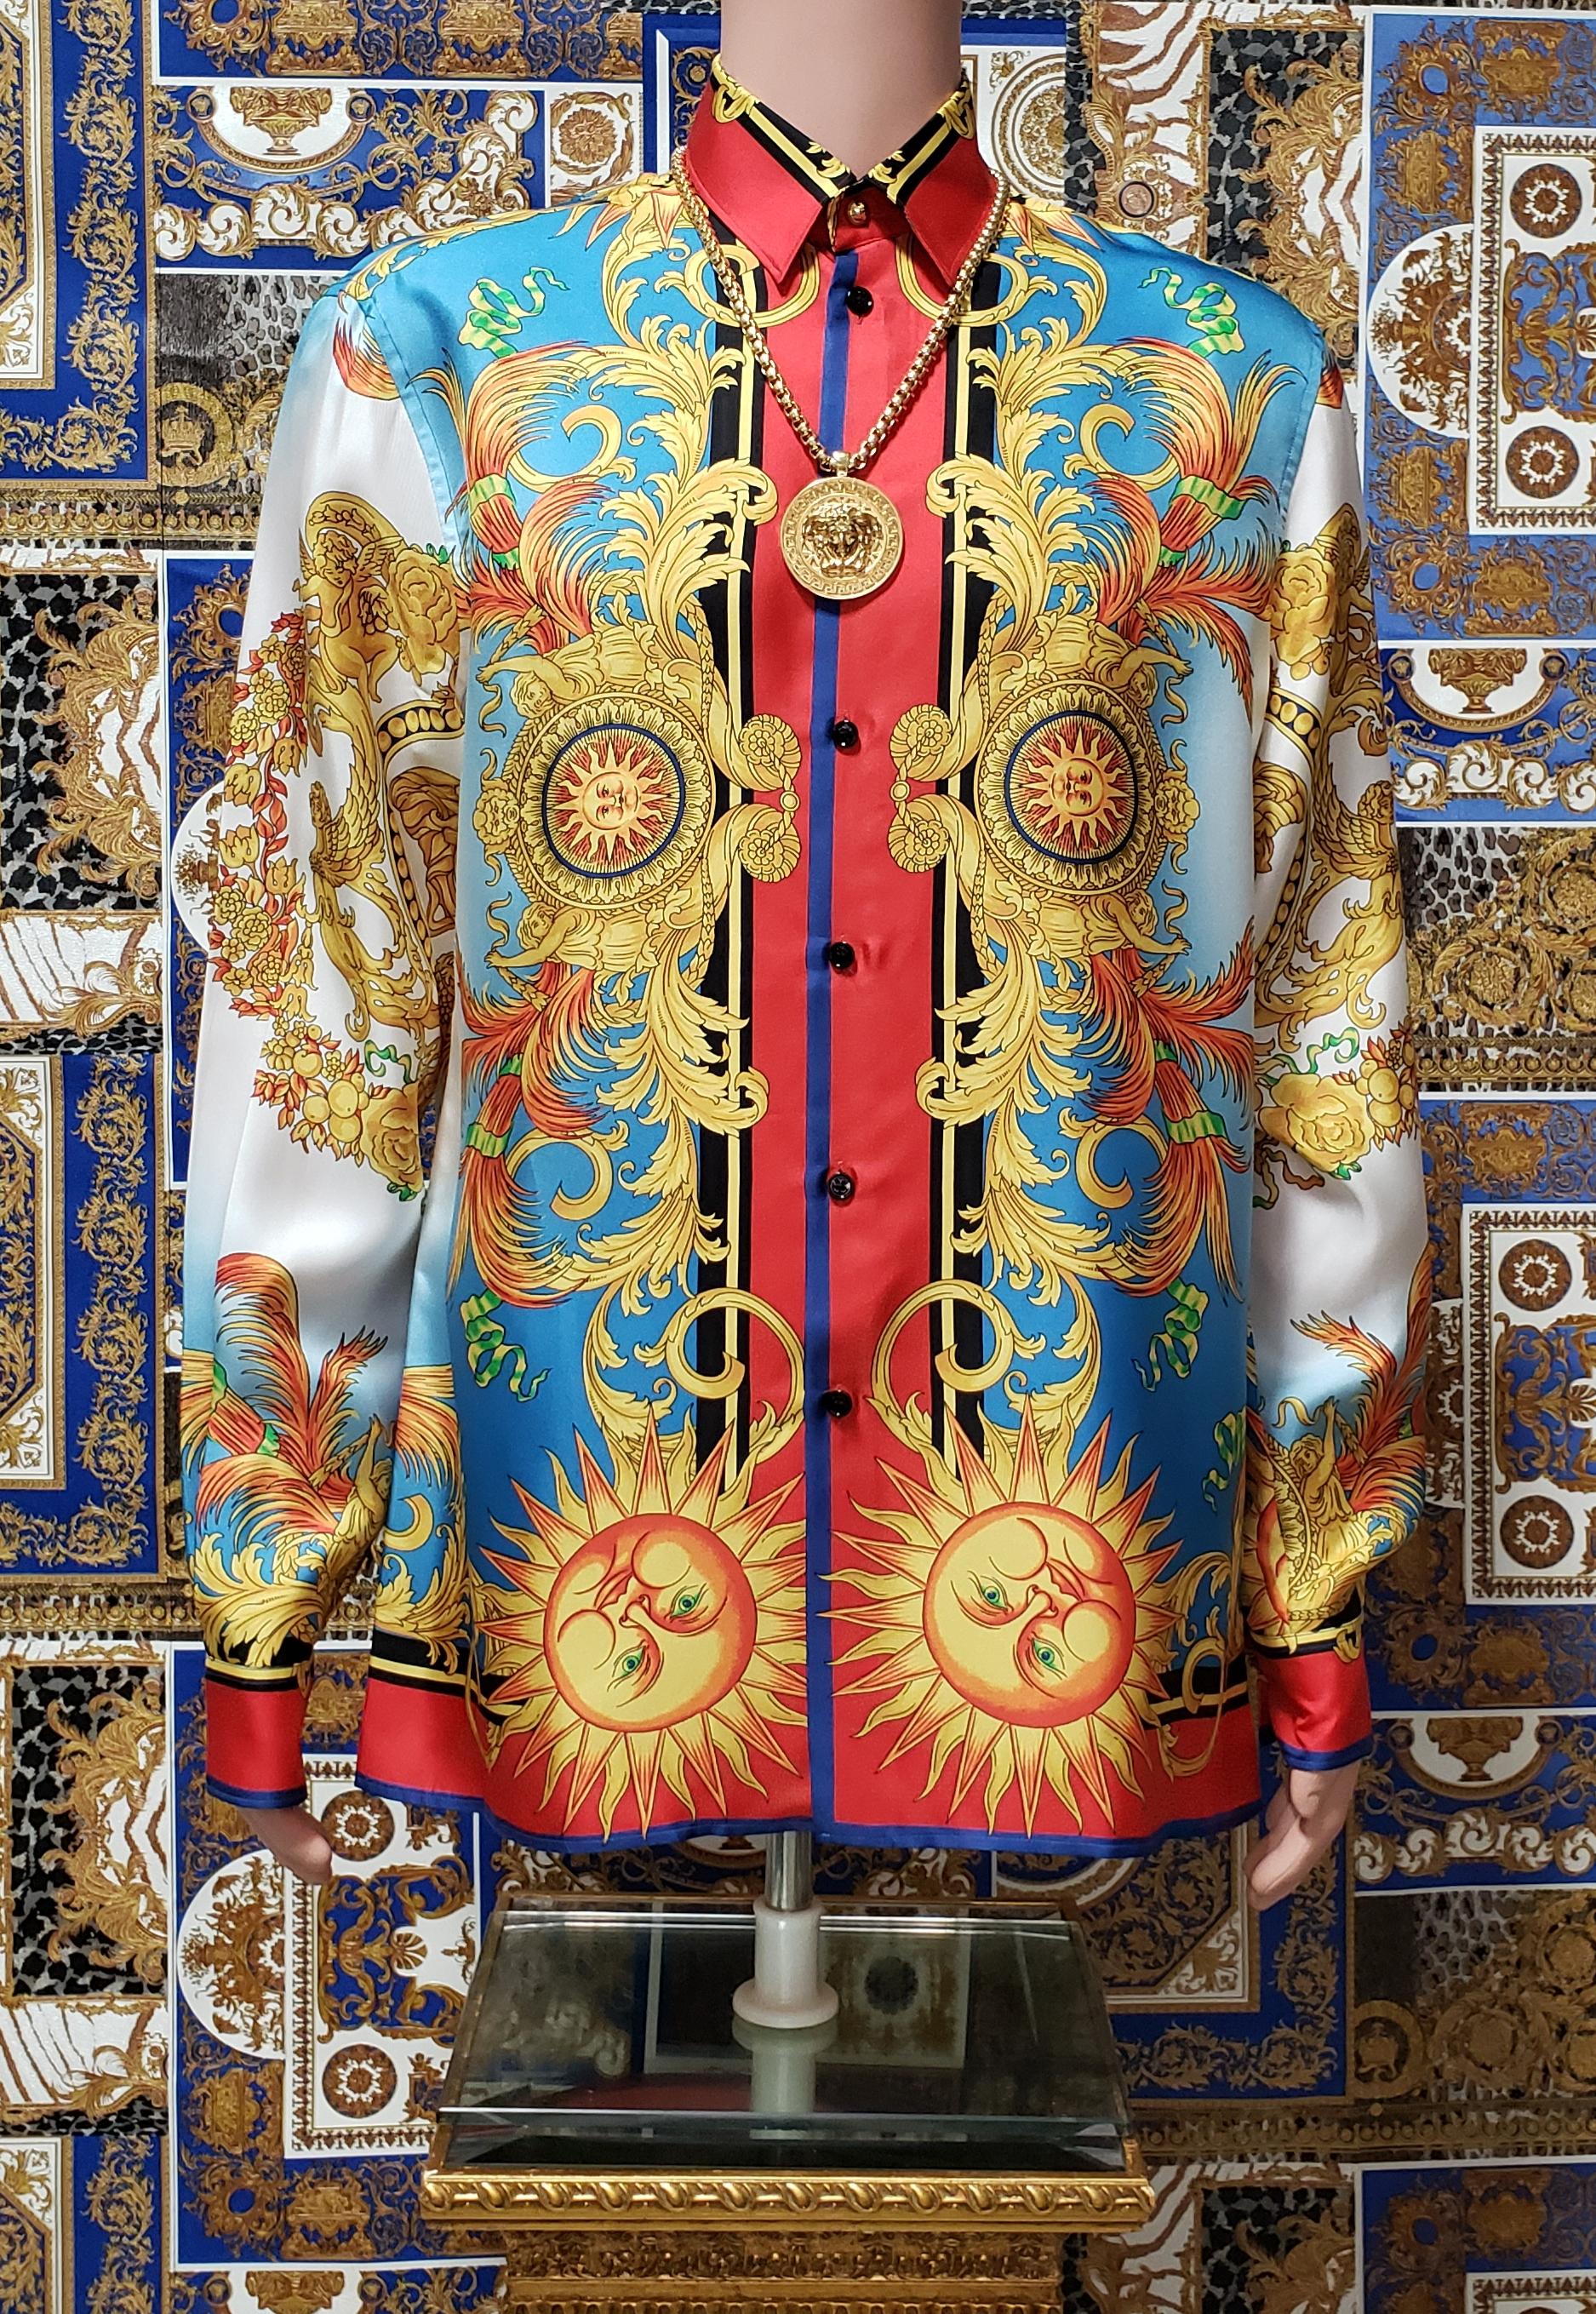 VERSACE 

BRAND NEW VERSACE PRINTED 100% SILK SHIRT 
Demonstrate your taste for luxurious accessories and your love for Versace signed pieces with this rich silk shirt.
A timeless yet trendy shirt that's sure to turn heads. 
Relaxed fit
Signature